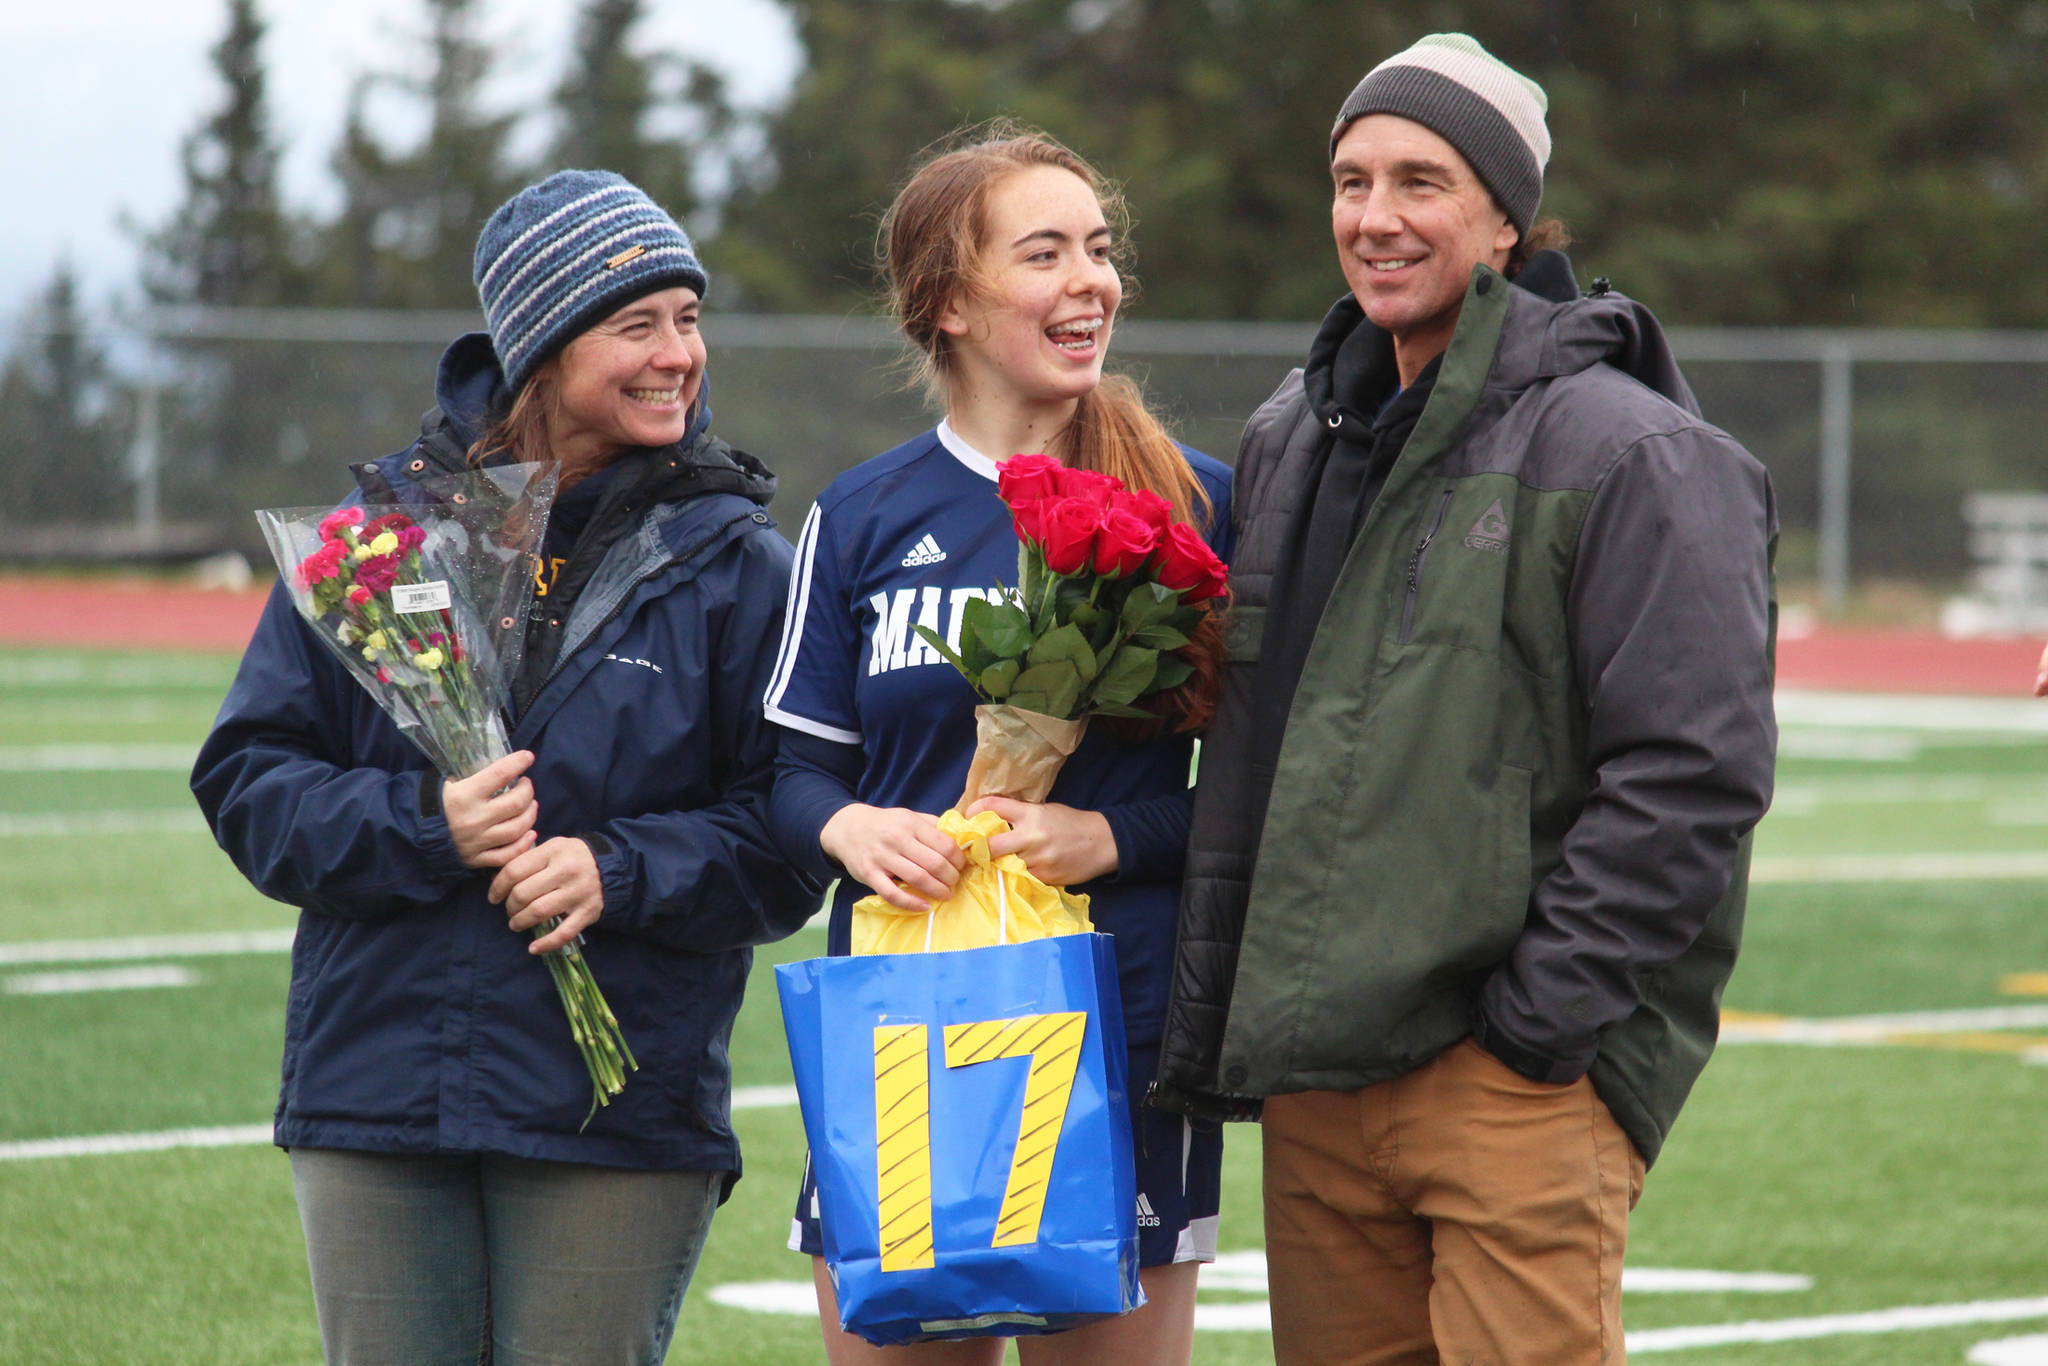 Defender Summer McGuire stands with her parents to be recognized during Senior Night between the girls and boys soccer games Friday, May 10, 2019 at Homer High School in Homer, Alaska. (Photo by Megan Pacer/Homer News)